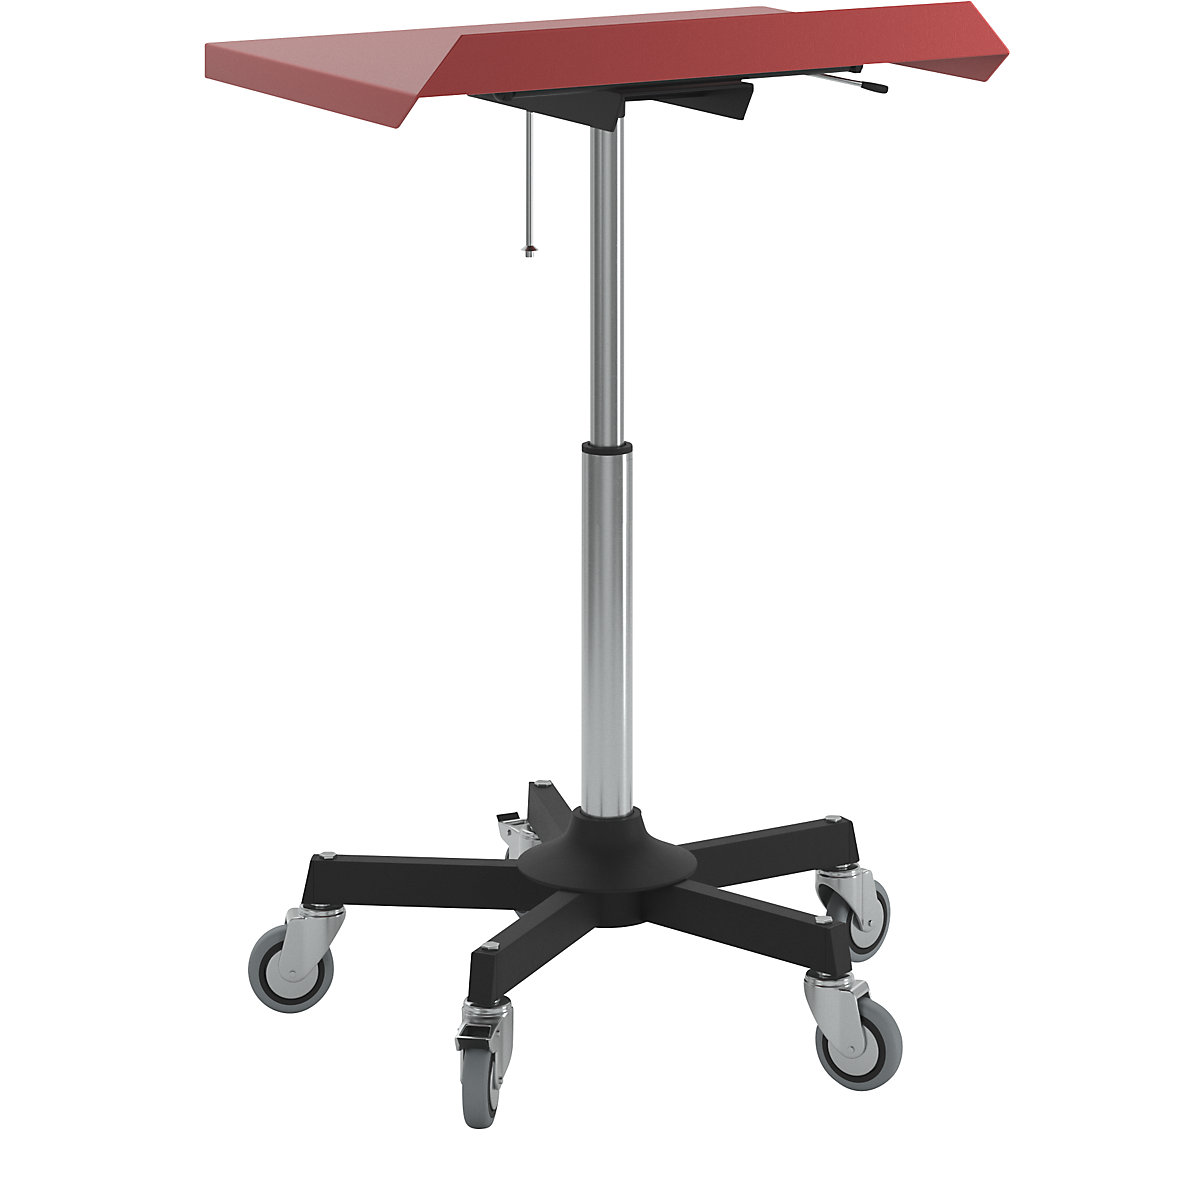 Material stand, mobile